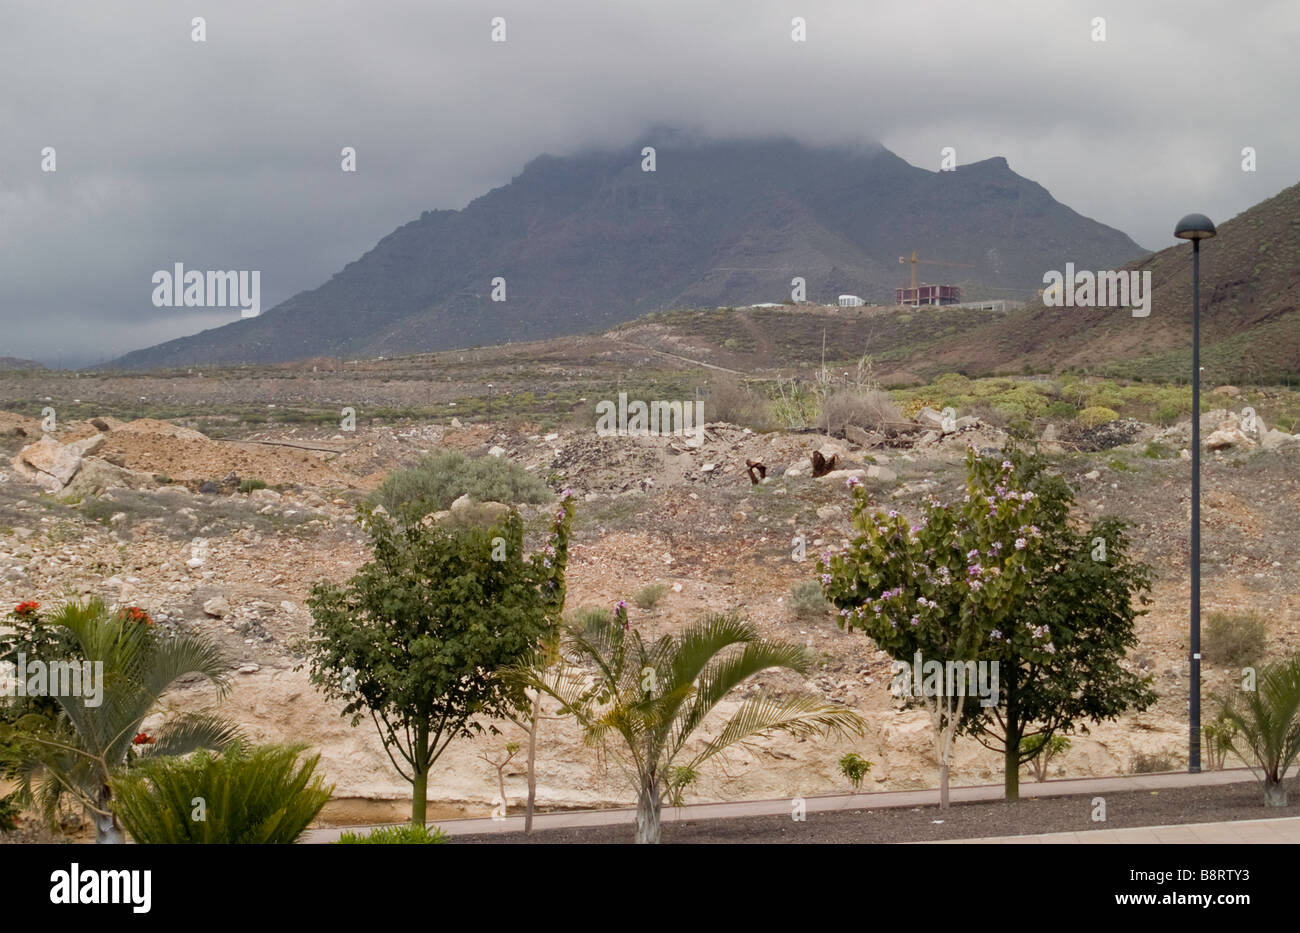 los christanos hills and construction Stock Photo